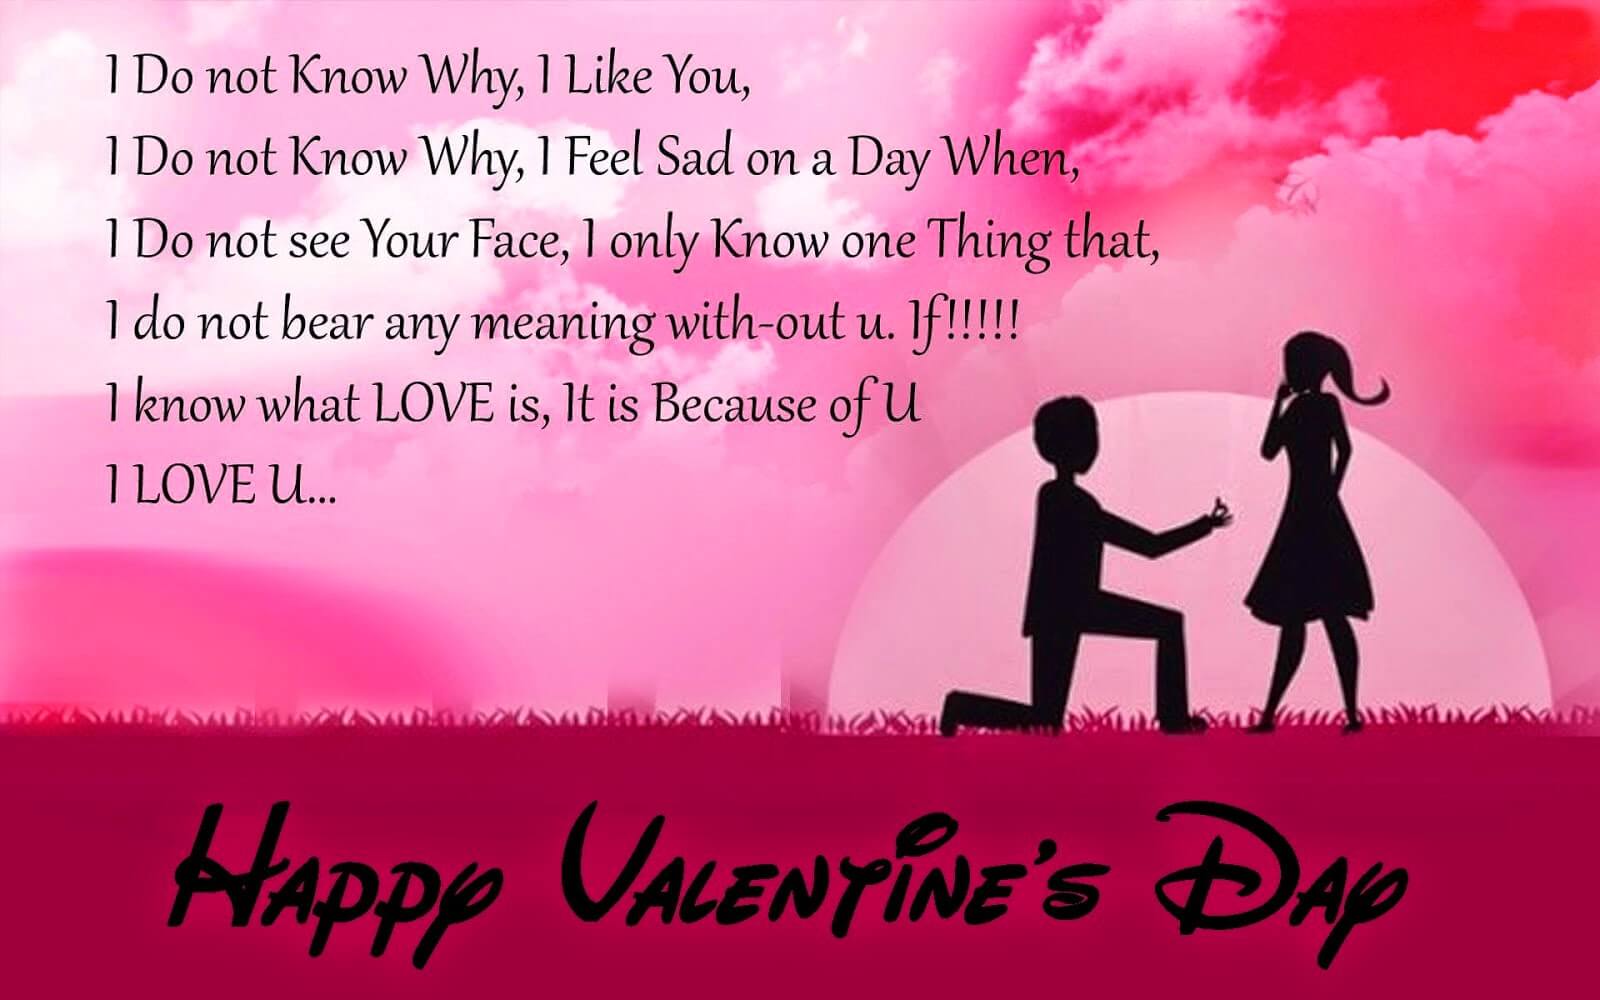 Happy Valentines day Love Poem Image Wallpaper Wishes For GF, BF